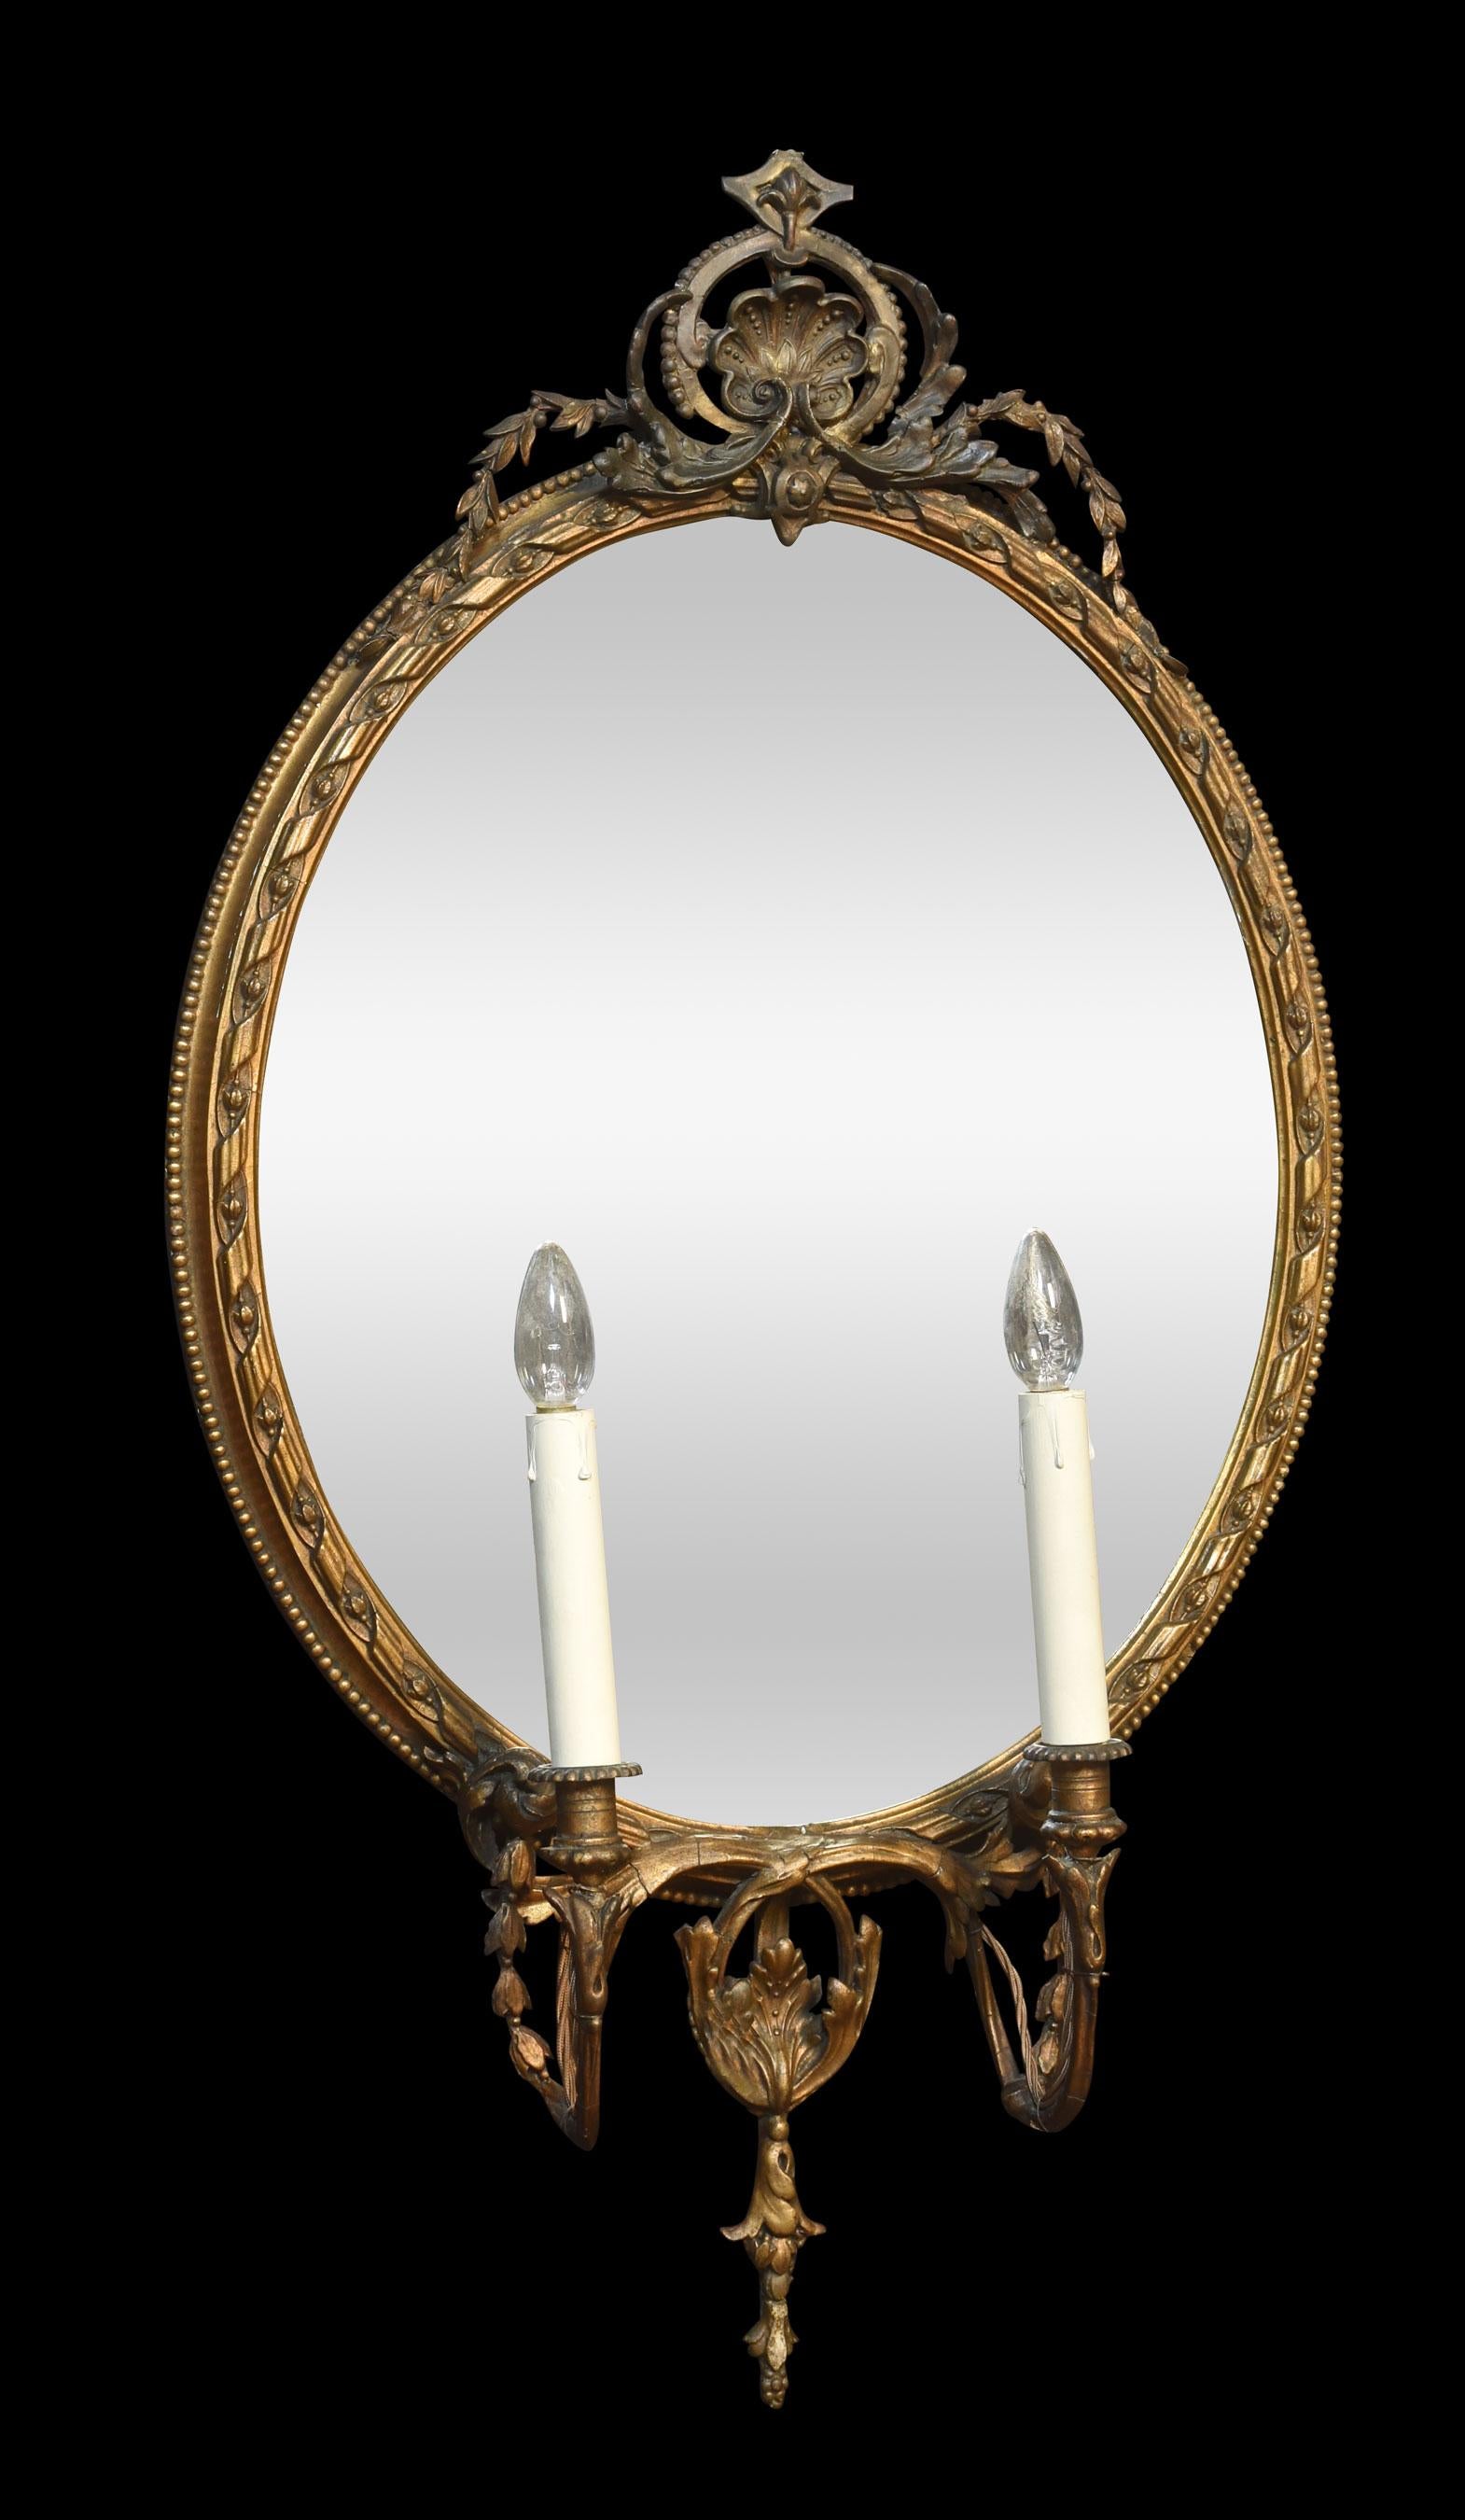 Pair of Gilt Girandole Wall Mirrors In Good Condition For Sale In Cheshire, GB